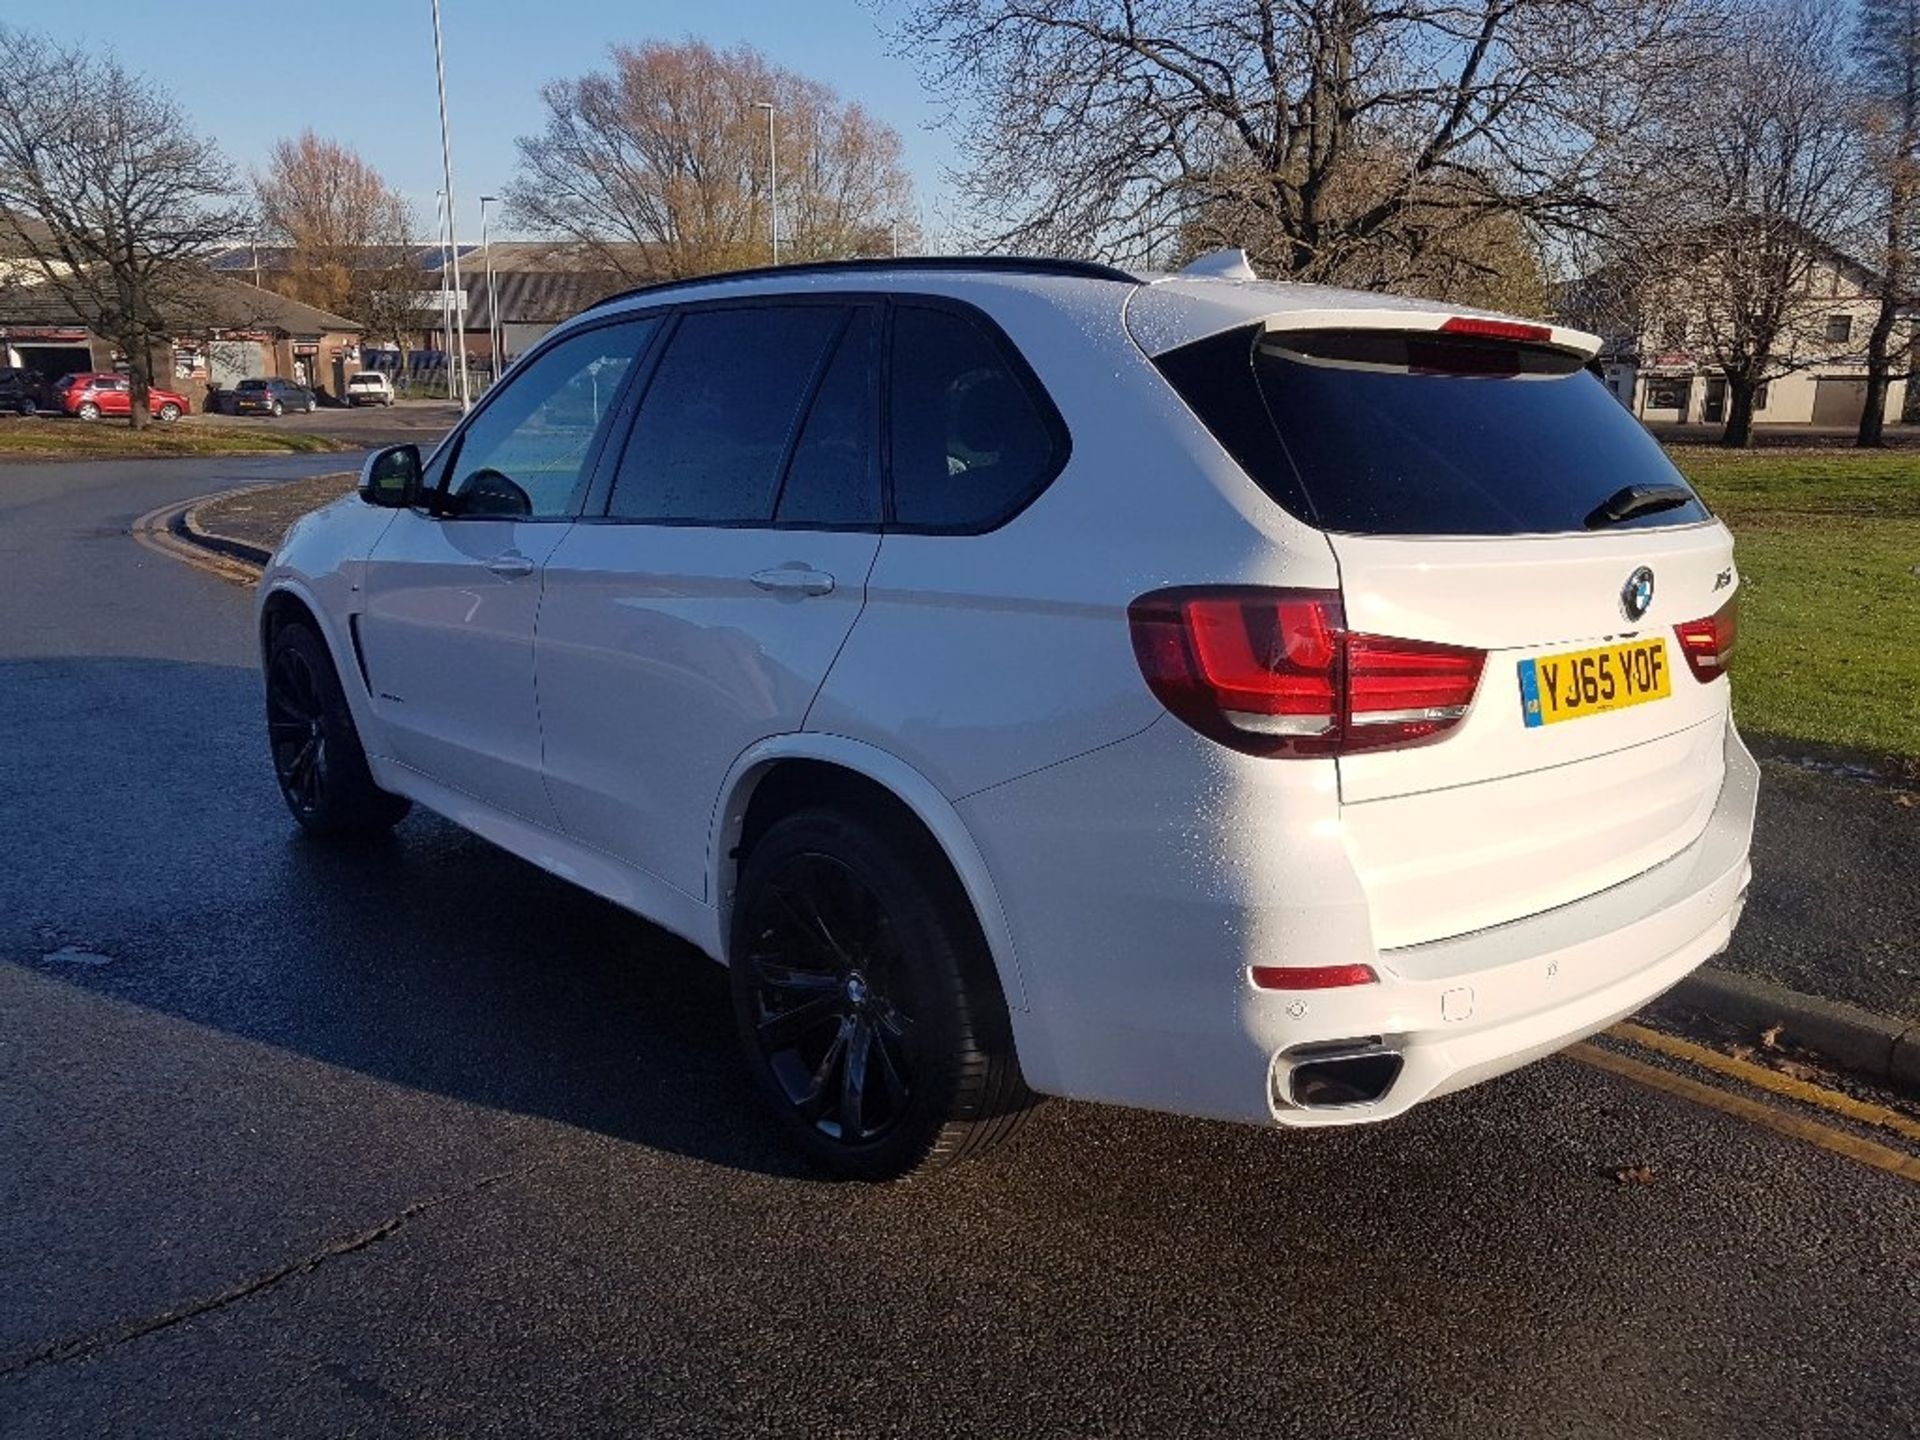 BMW, X5 40D M SPORT STEPTRONIC, 29.09.2015, YJ65 YOF, 3-0 LTR, DIESEL, AUTOMATIC, 5 DOOR SUV, 17,006 - Image 17 of 20